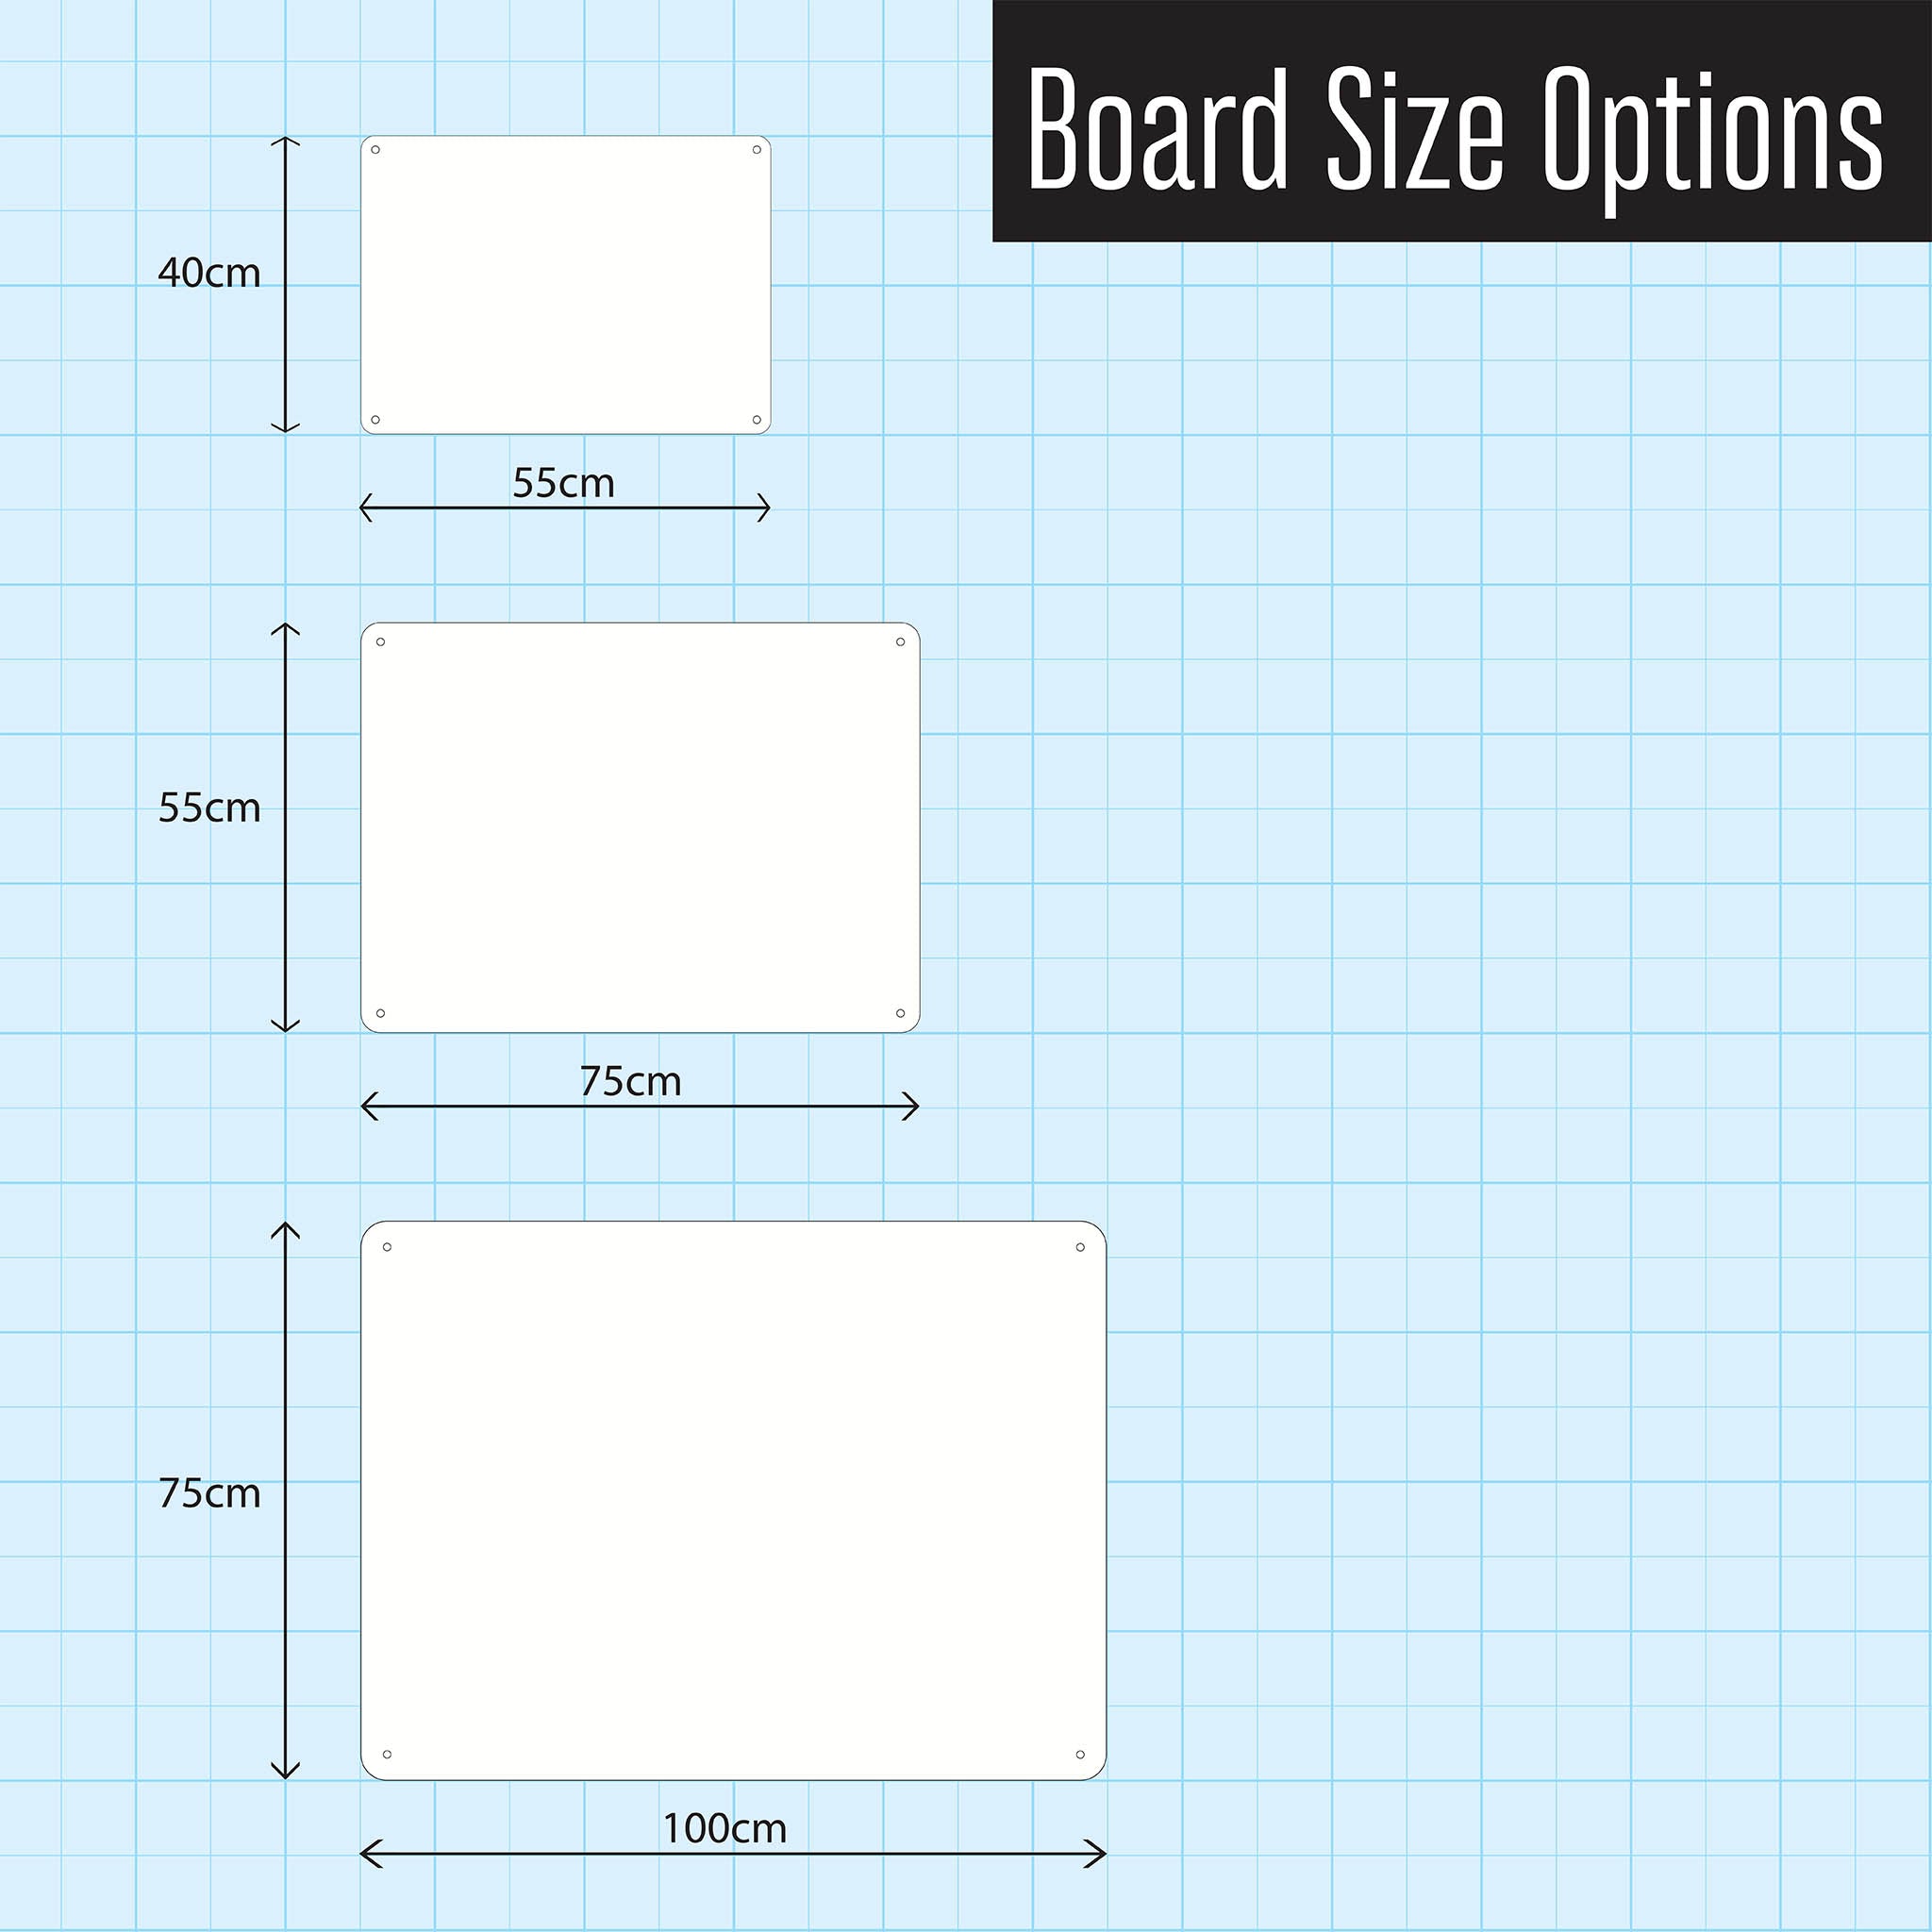 A diagram showing three sizes of magnetic notice boards